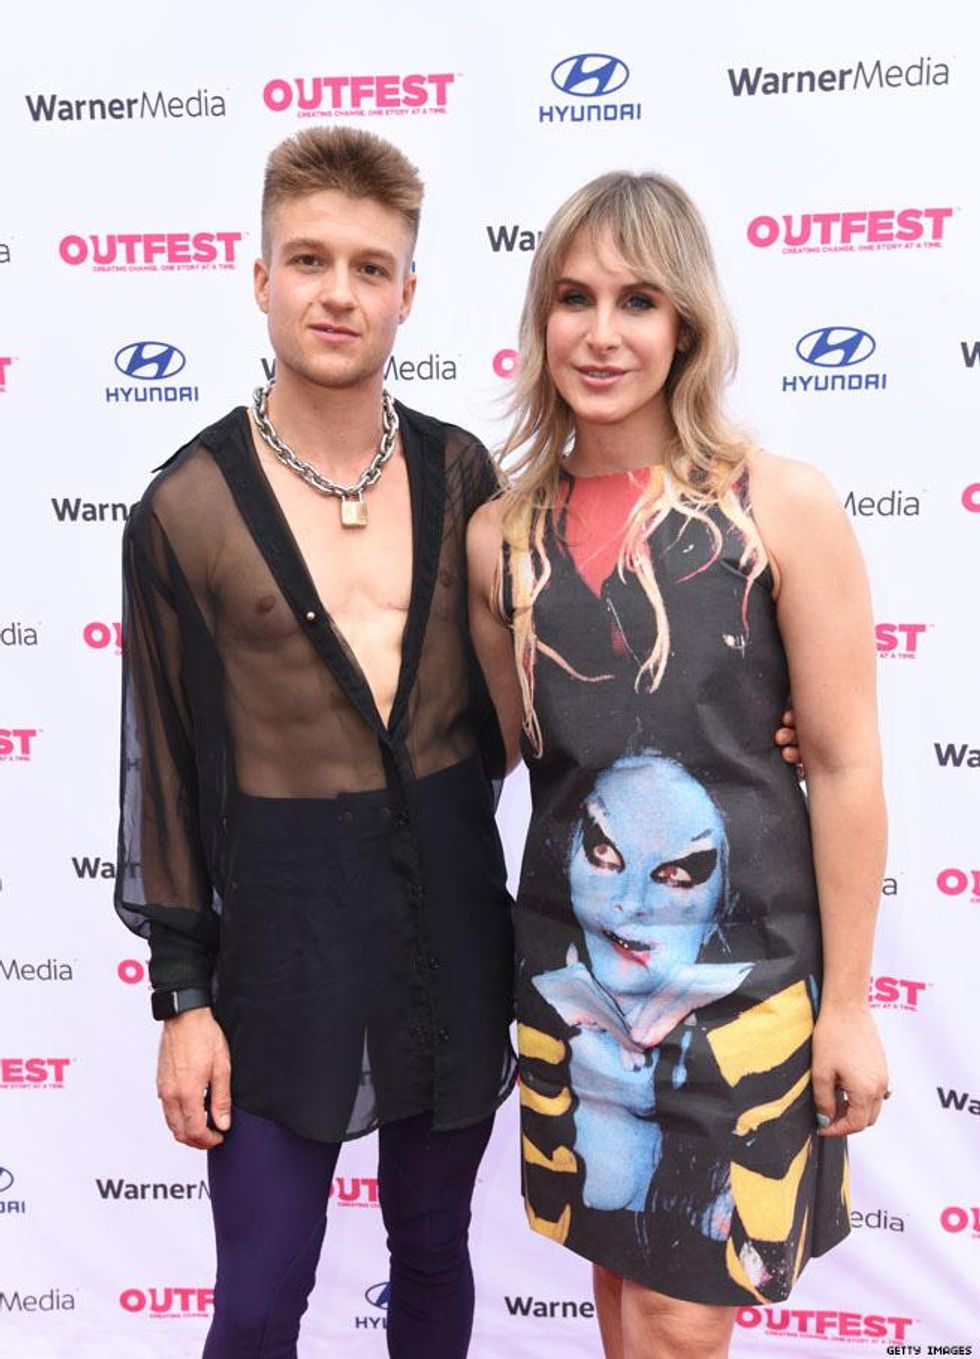 Outfest Trans and Nonbinary Summit 2021